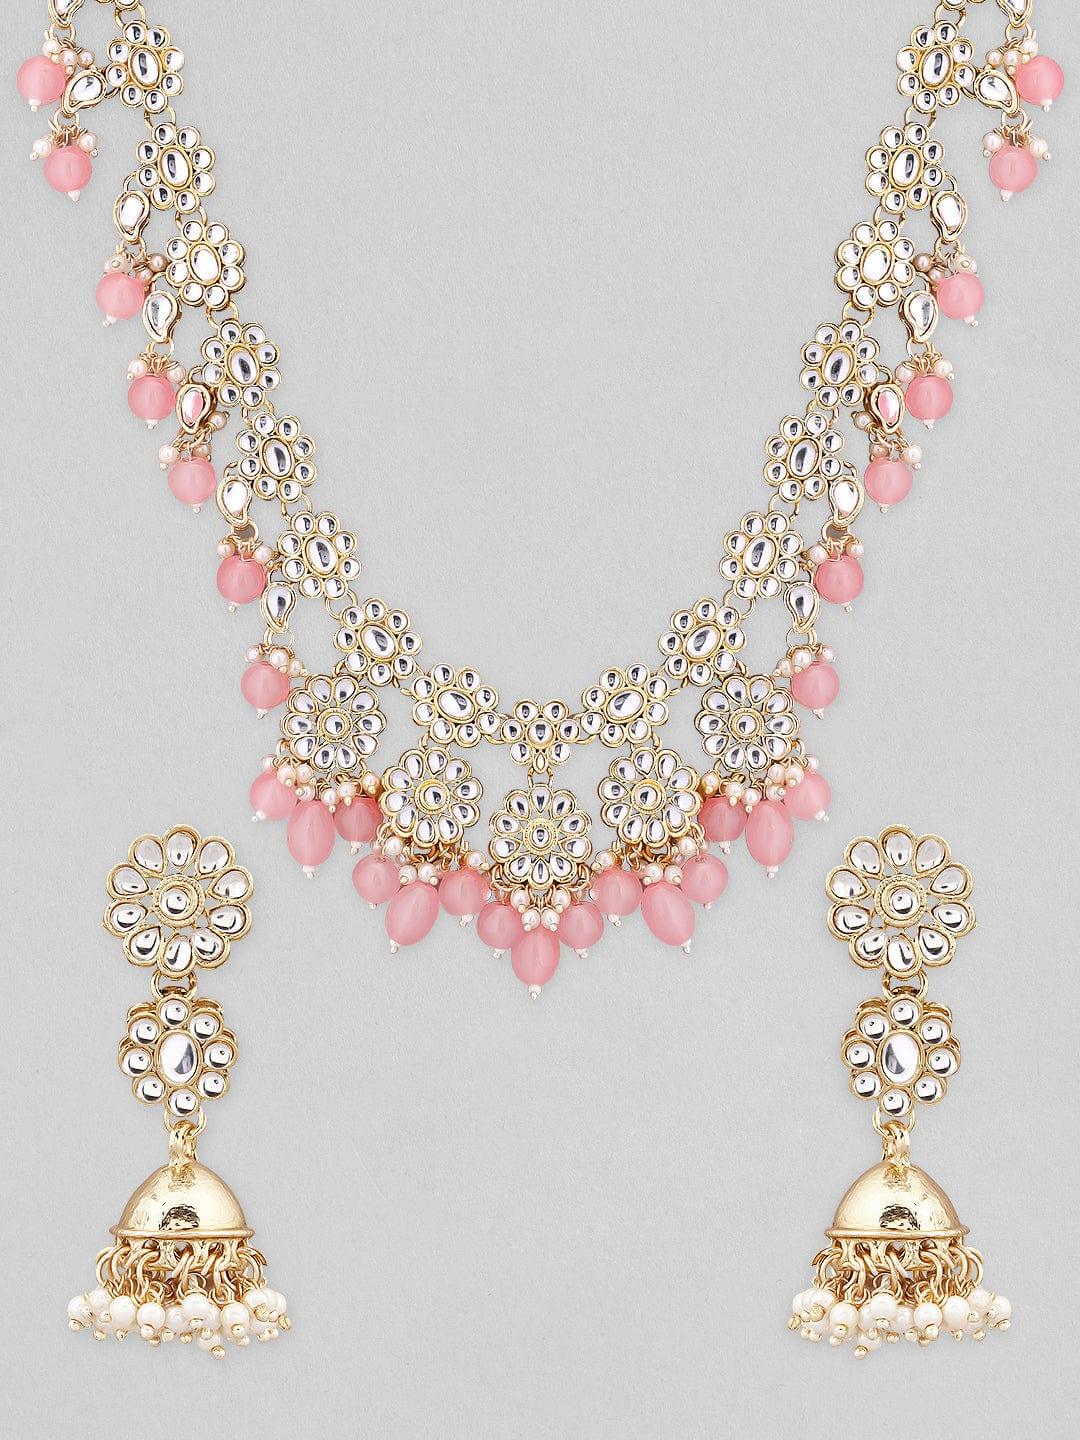 Rubans 22K Gold Plated Necklace Set With American Diamonds And Pink Stones. - Indiakreations